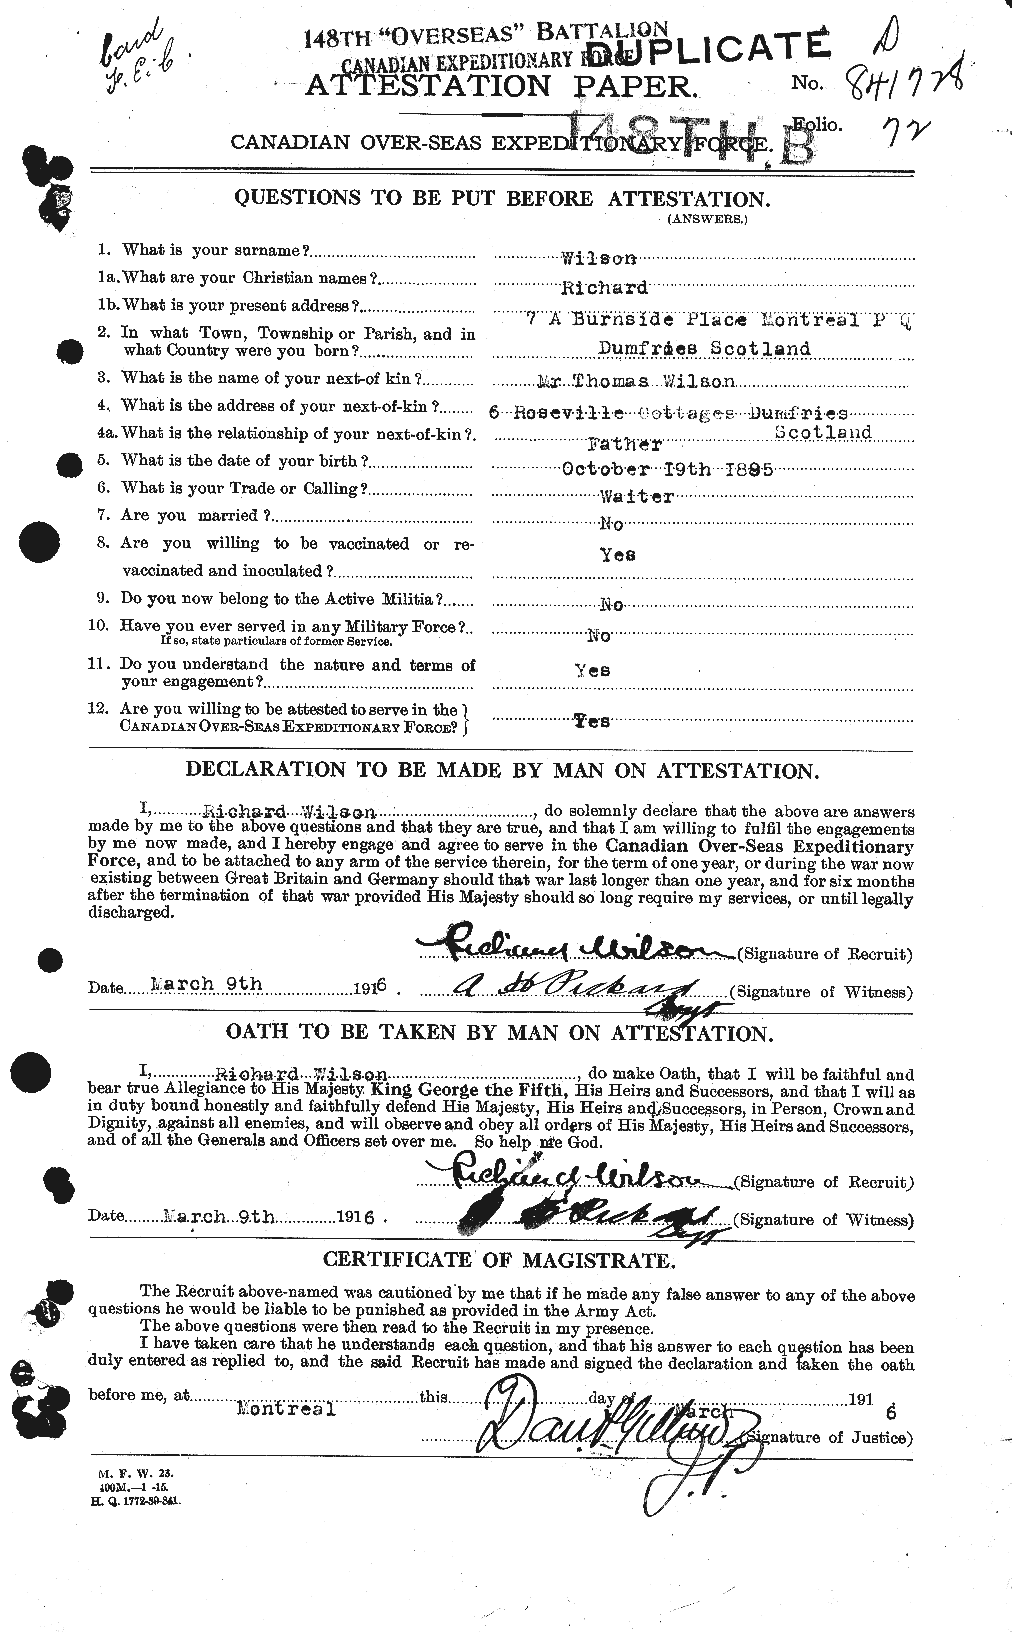 Personnel Records of the First World War - CEF 678837a